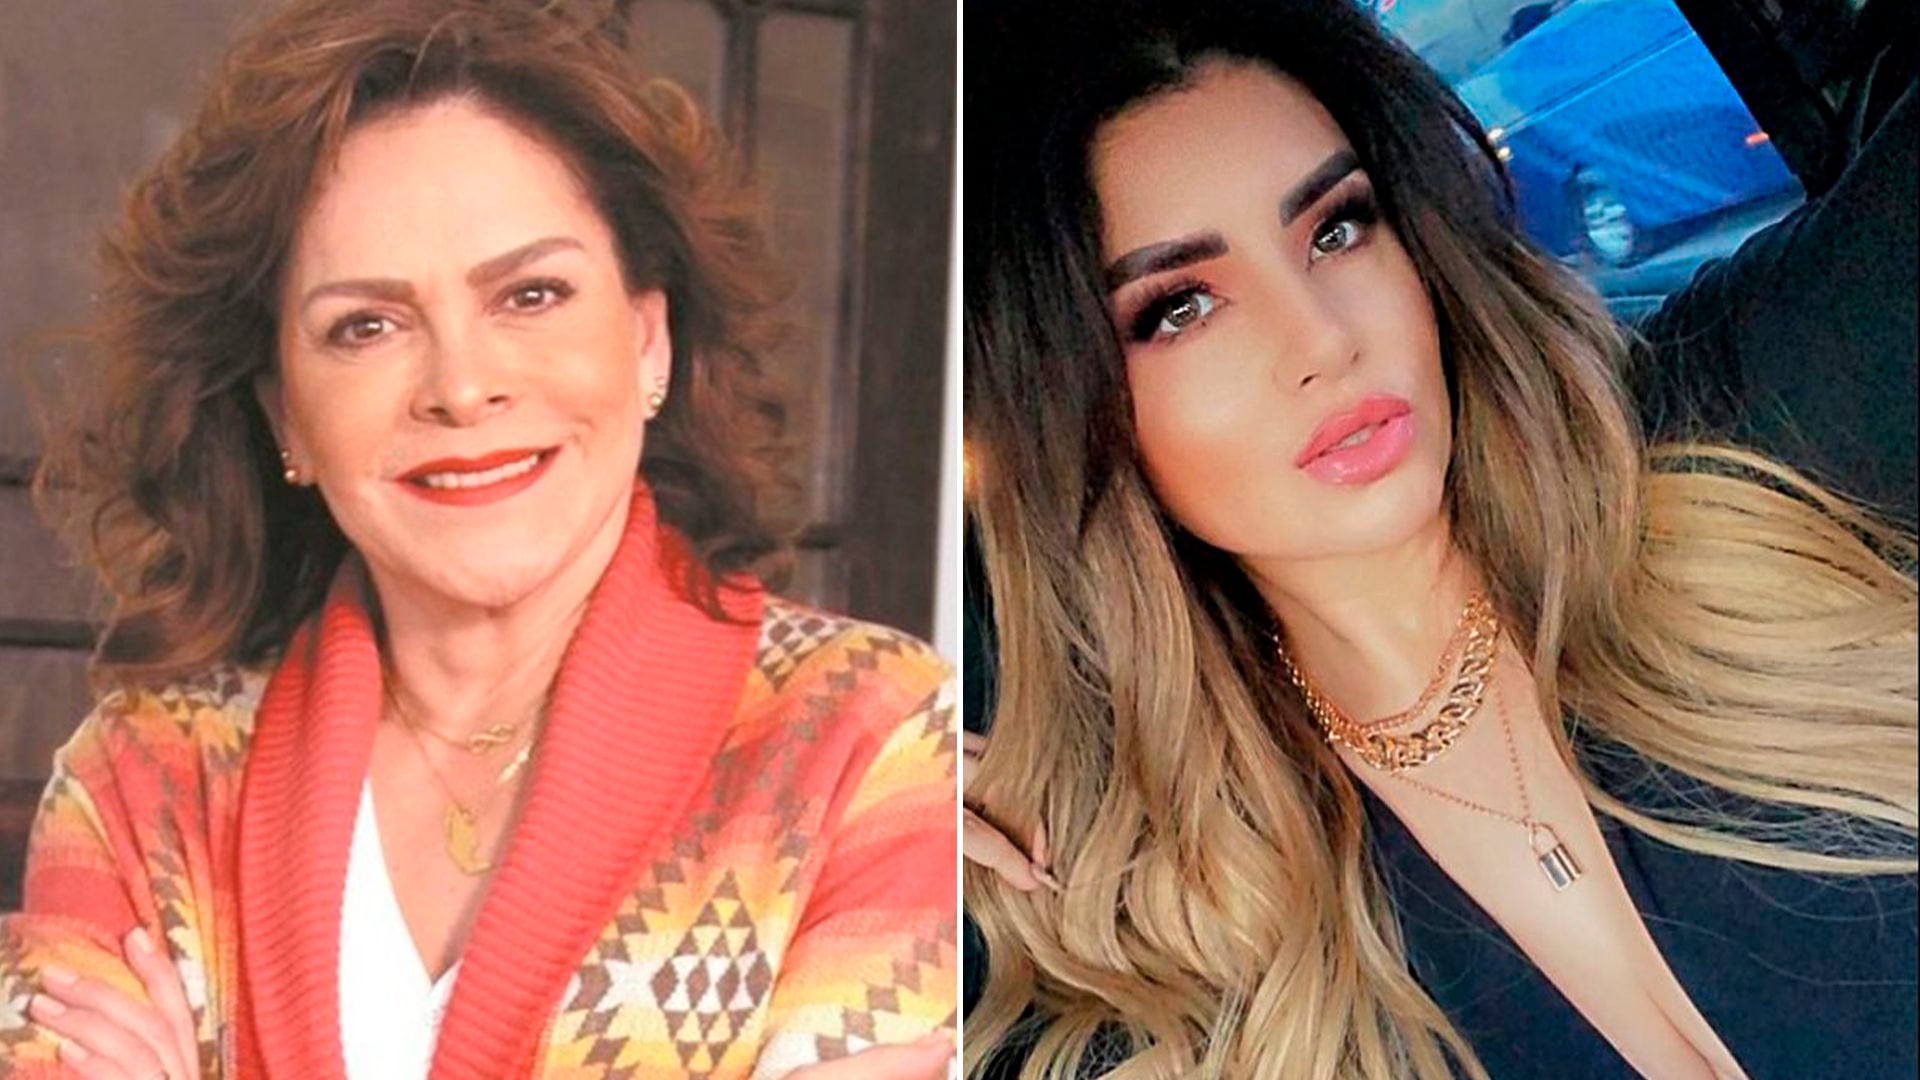 How was the meeting between Mara Patricia Castañeda and Vicente Fernández Jr.’s new girlfriend?